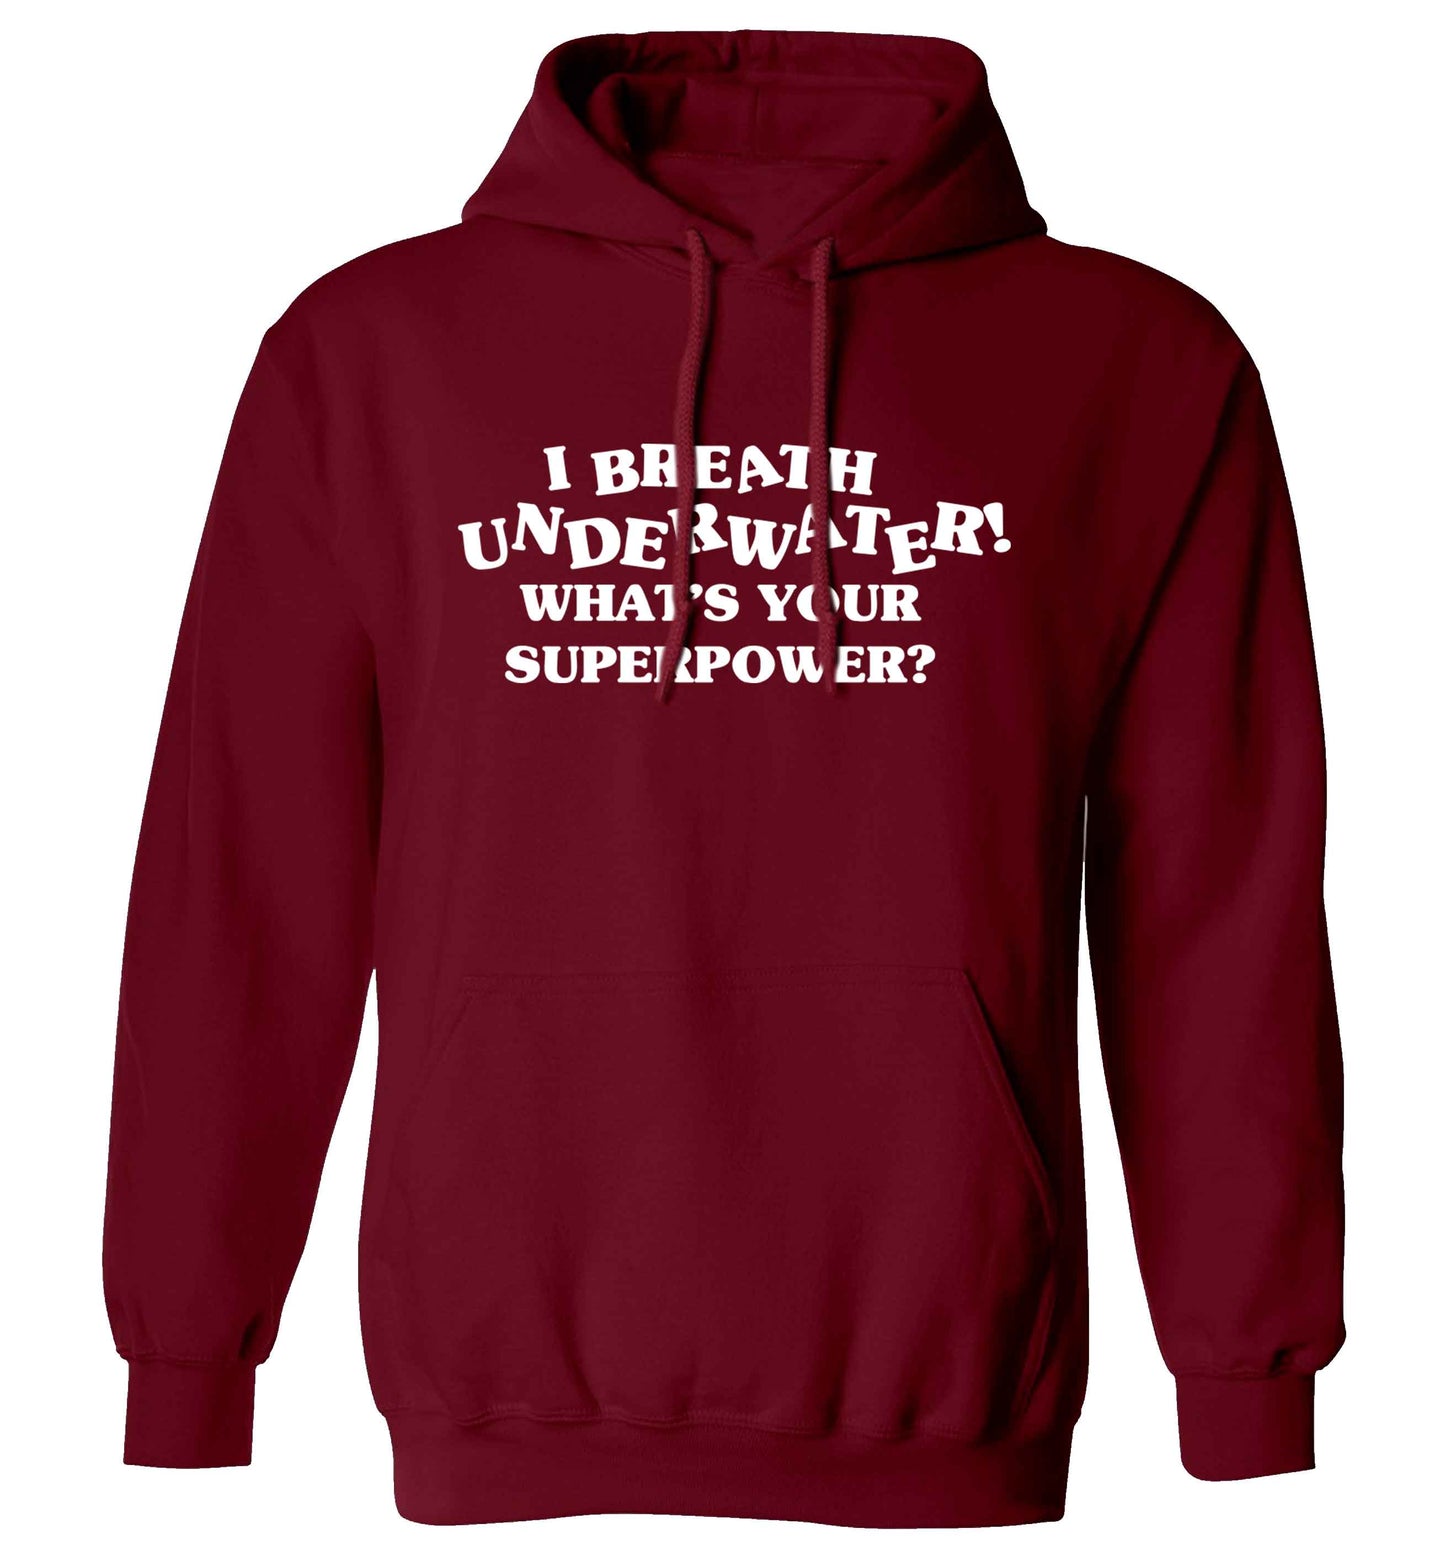 I breath underwater what's your superpower? adults unisex maroon hoodie 2XL